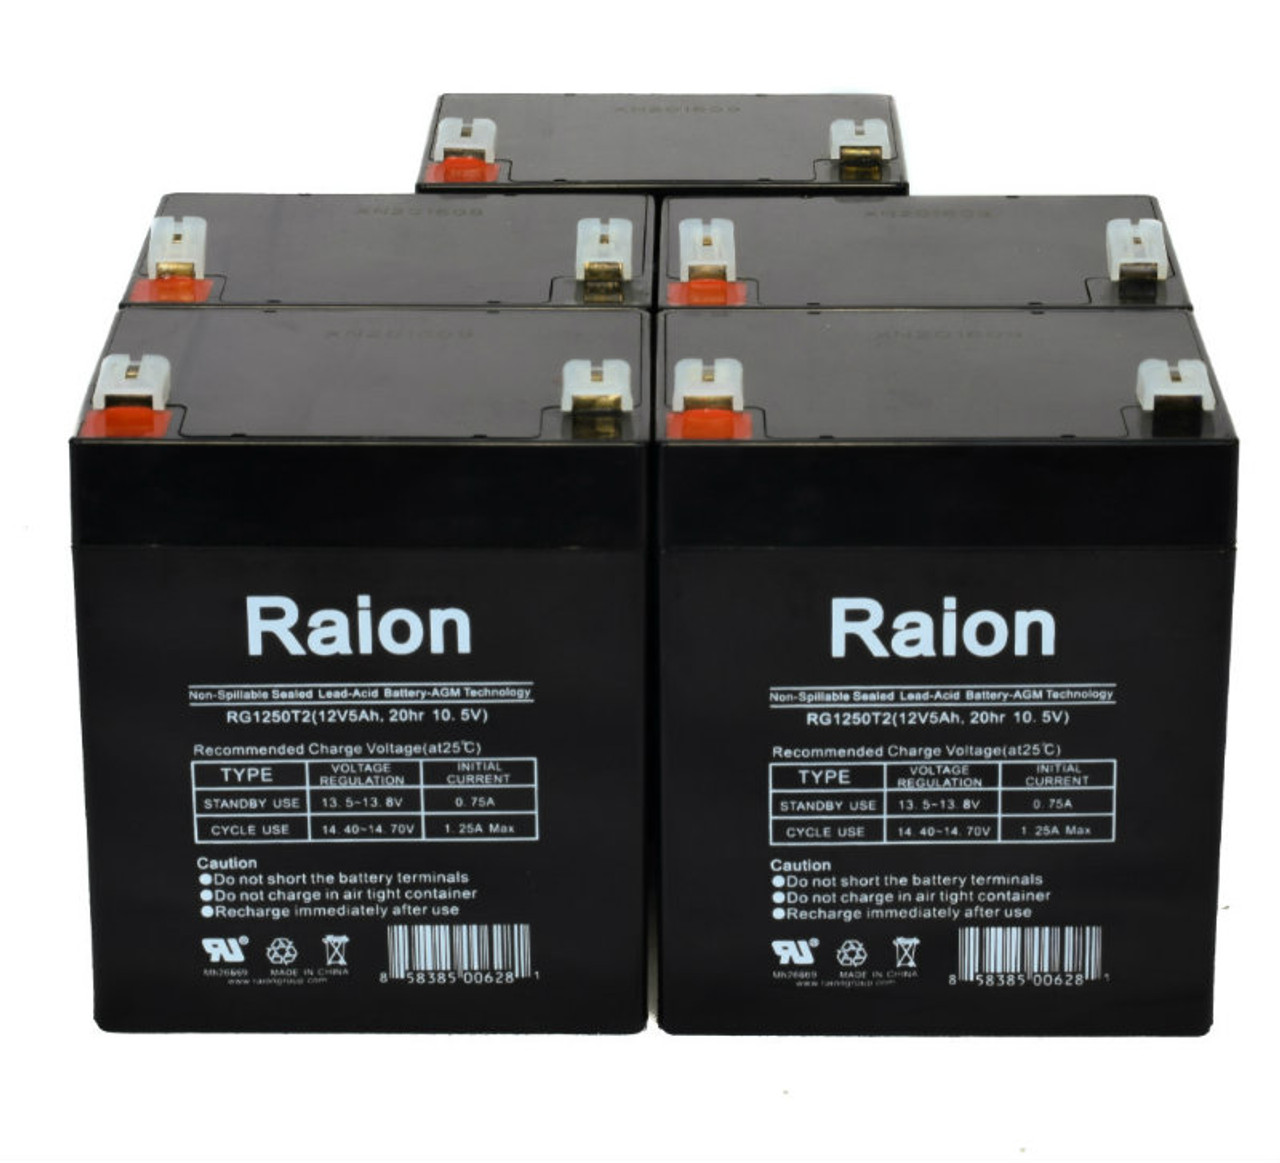 Raion Power RG1250T1 Replacement Fire Alarm Control Panel Battery for ADT Security Alarm Safewatch Pro 3000EN - 5 Pack